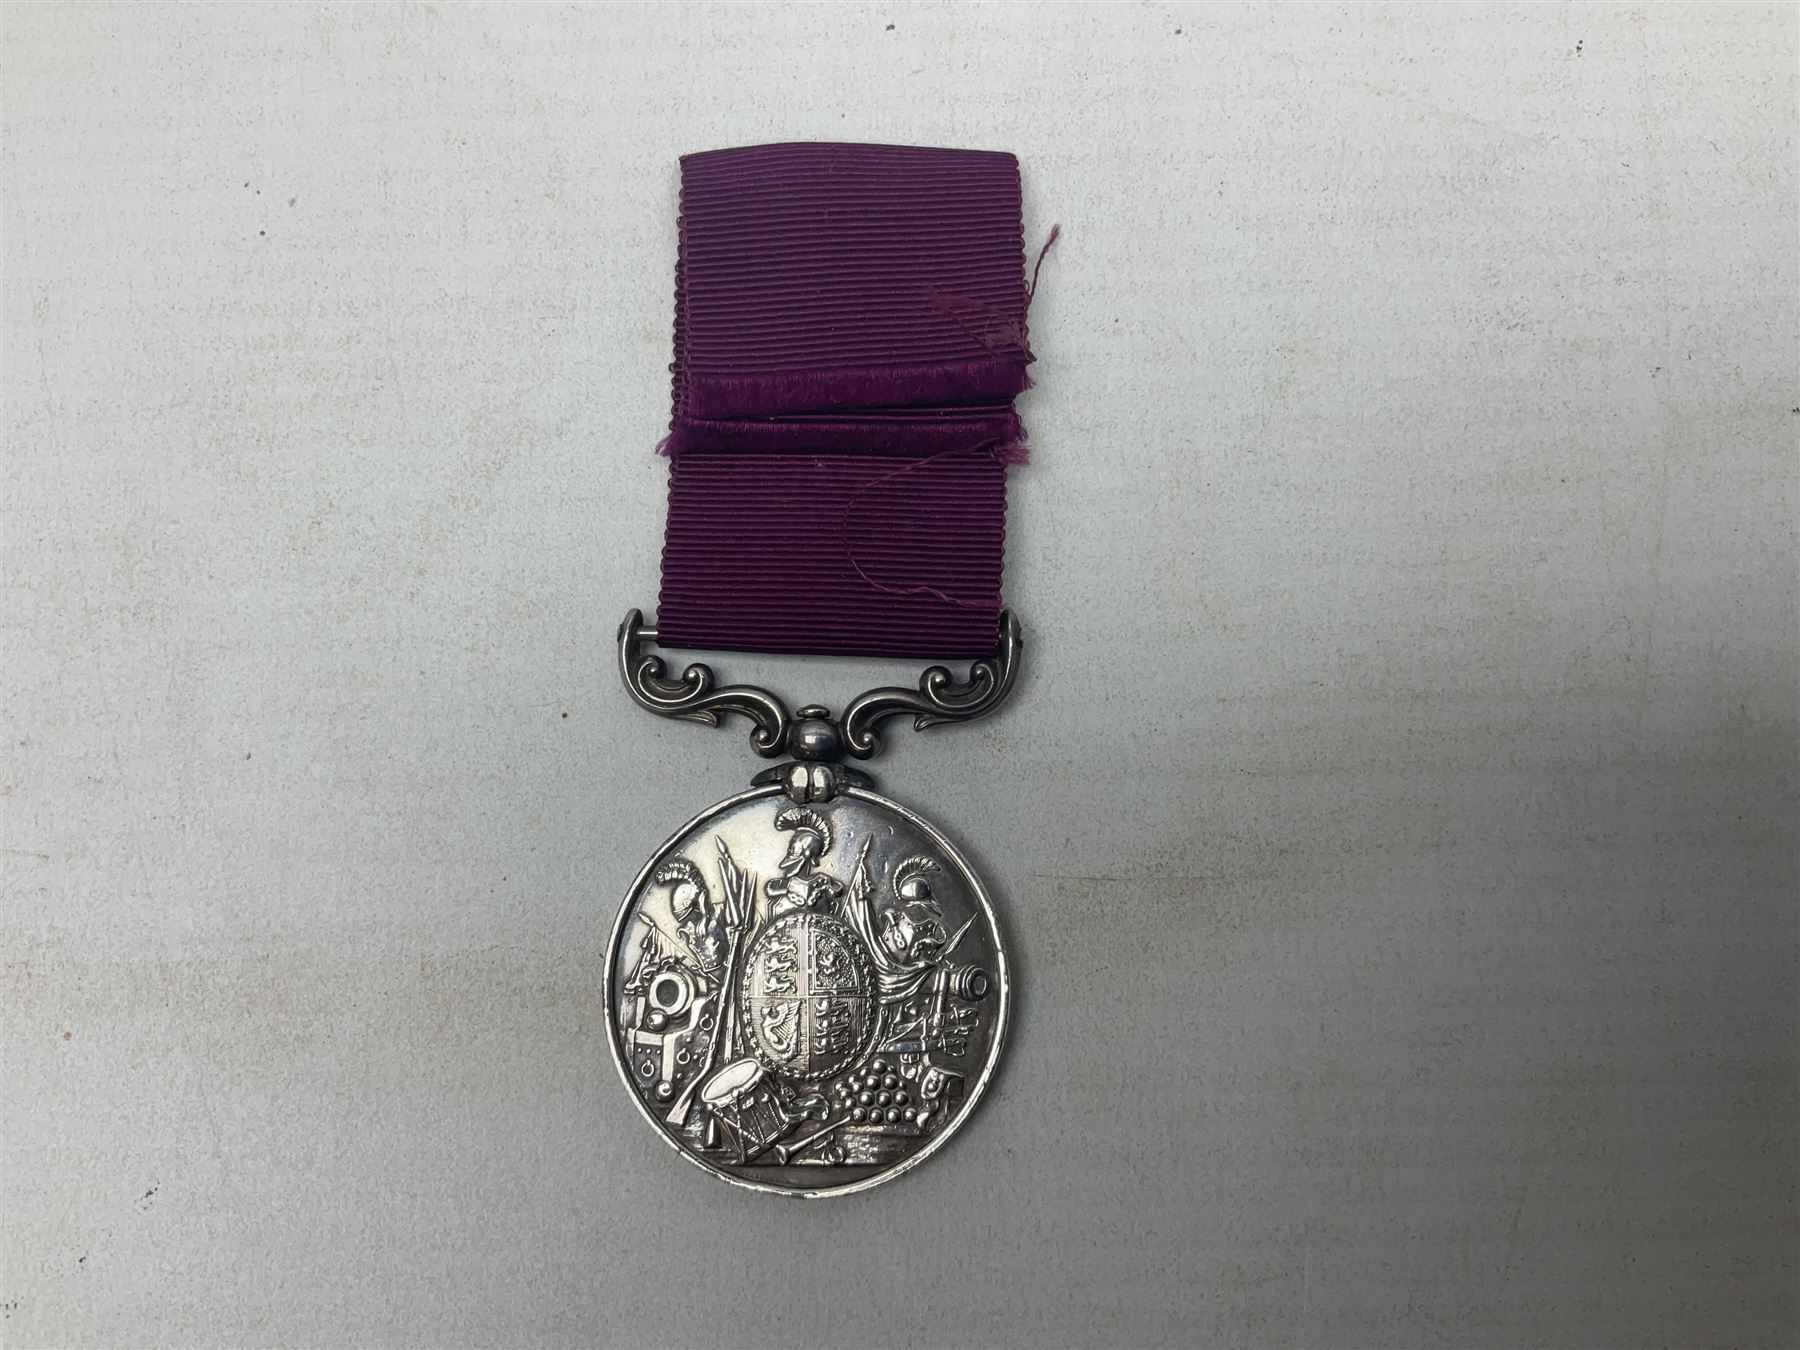 Victoria Army Long Service and Good Conduct Medal awarded to 4094 Sjt.-Mjr. W. Gubbins Grndr. Gds.; - Image 6 of 13